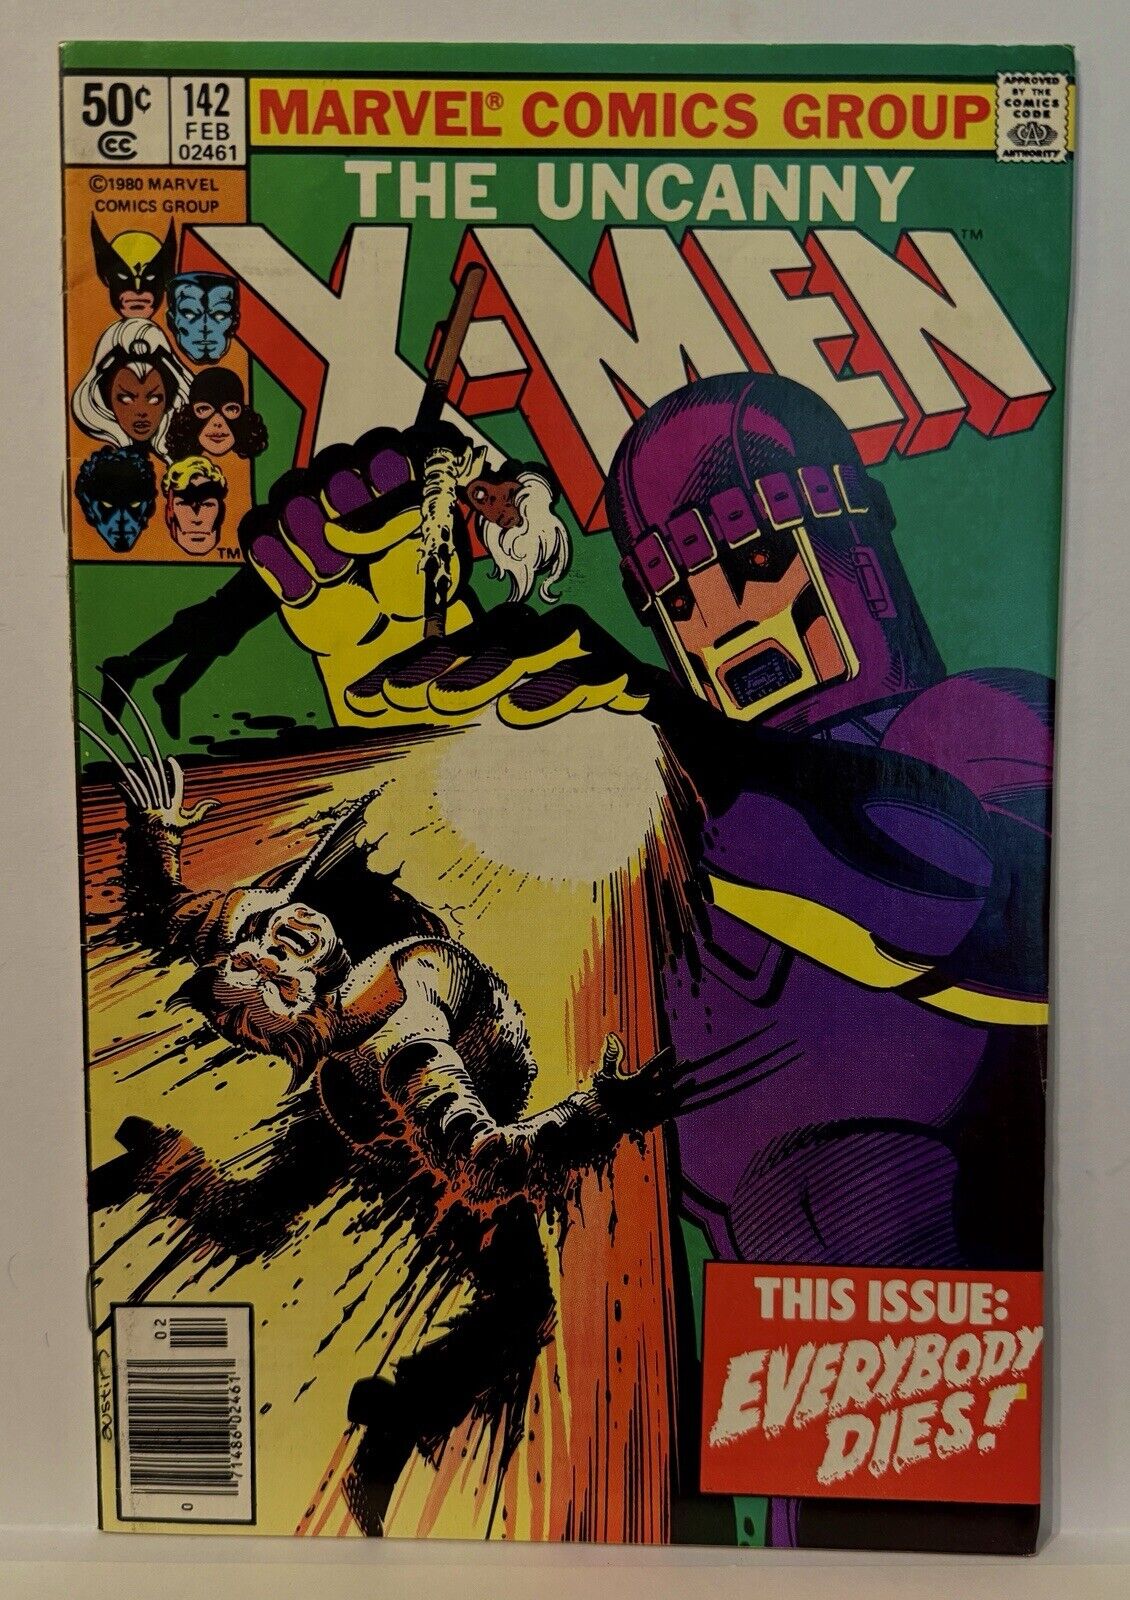 The Uncanny X-Men #142 Days Of Future Past, Feb 1981, 6.5 to 7.5 (FN+ to VF-)